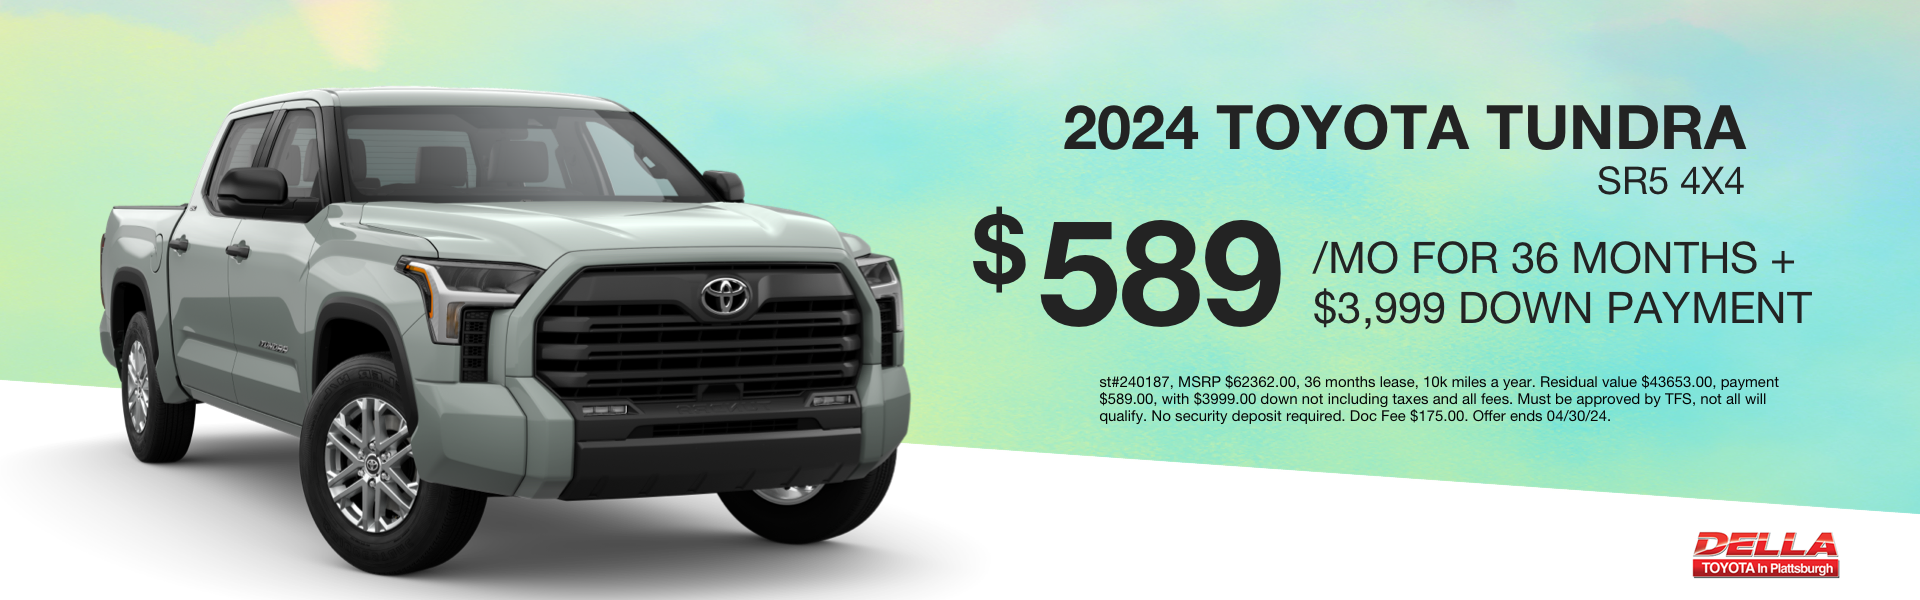 2024 Toyota Tundra SR5 4x4 $589 per month for 36 months $399